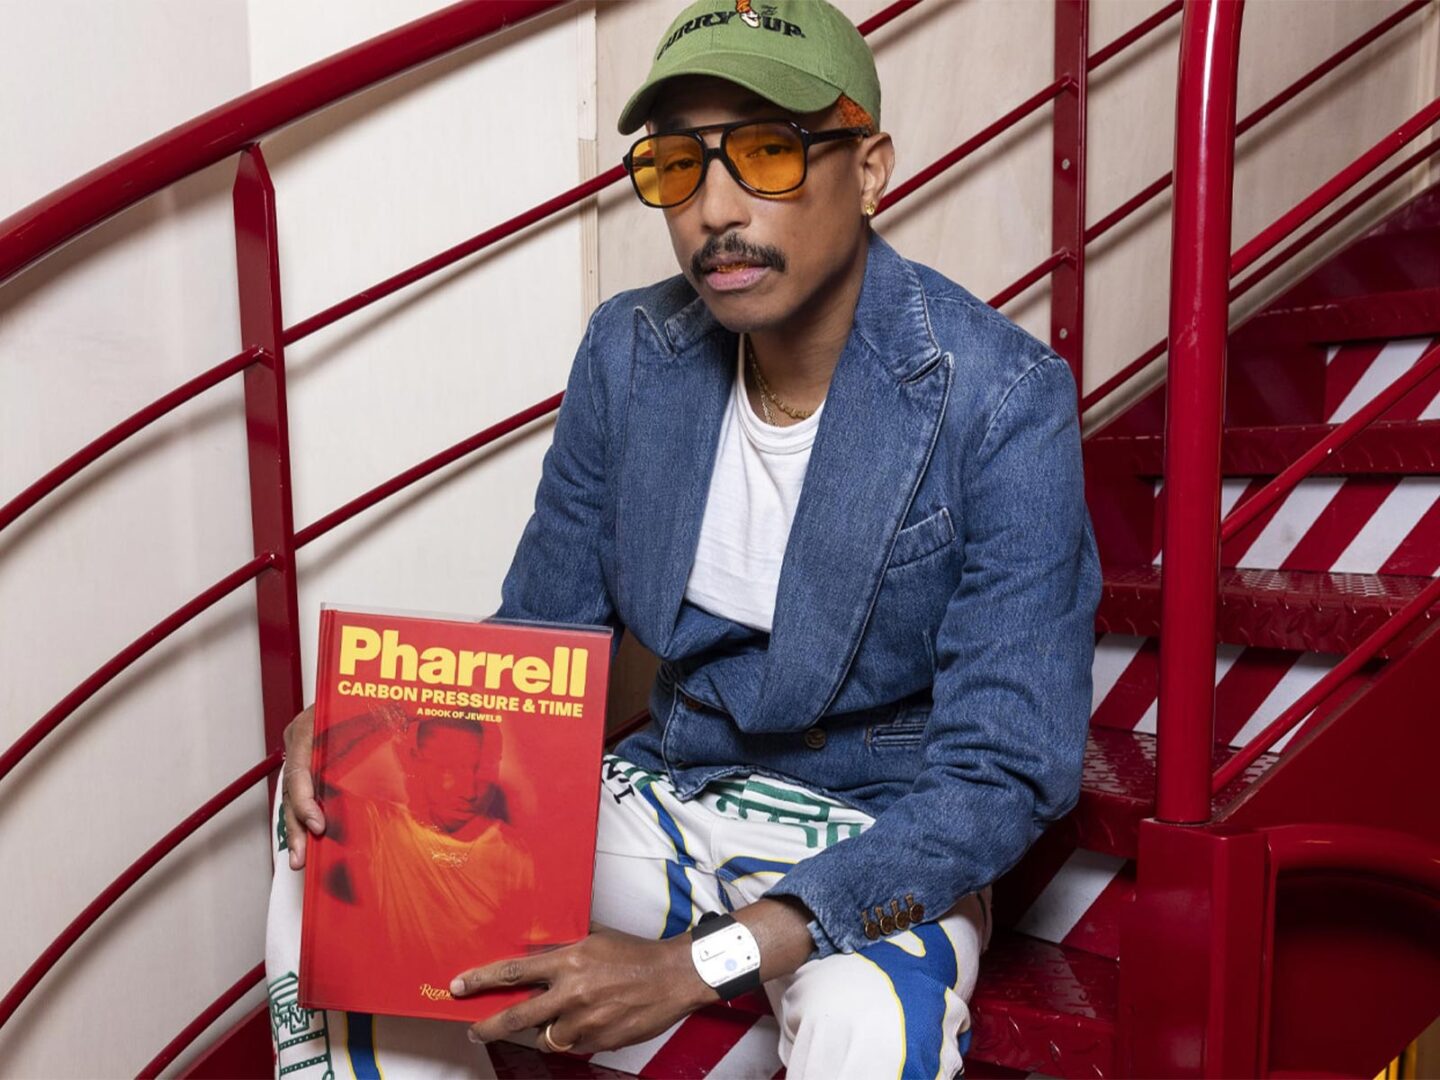 ‘Pharrell: Carbon, Pressure & Time: A Book of Jewels’ is the creative’s latest project